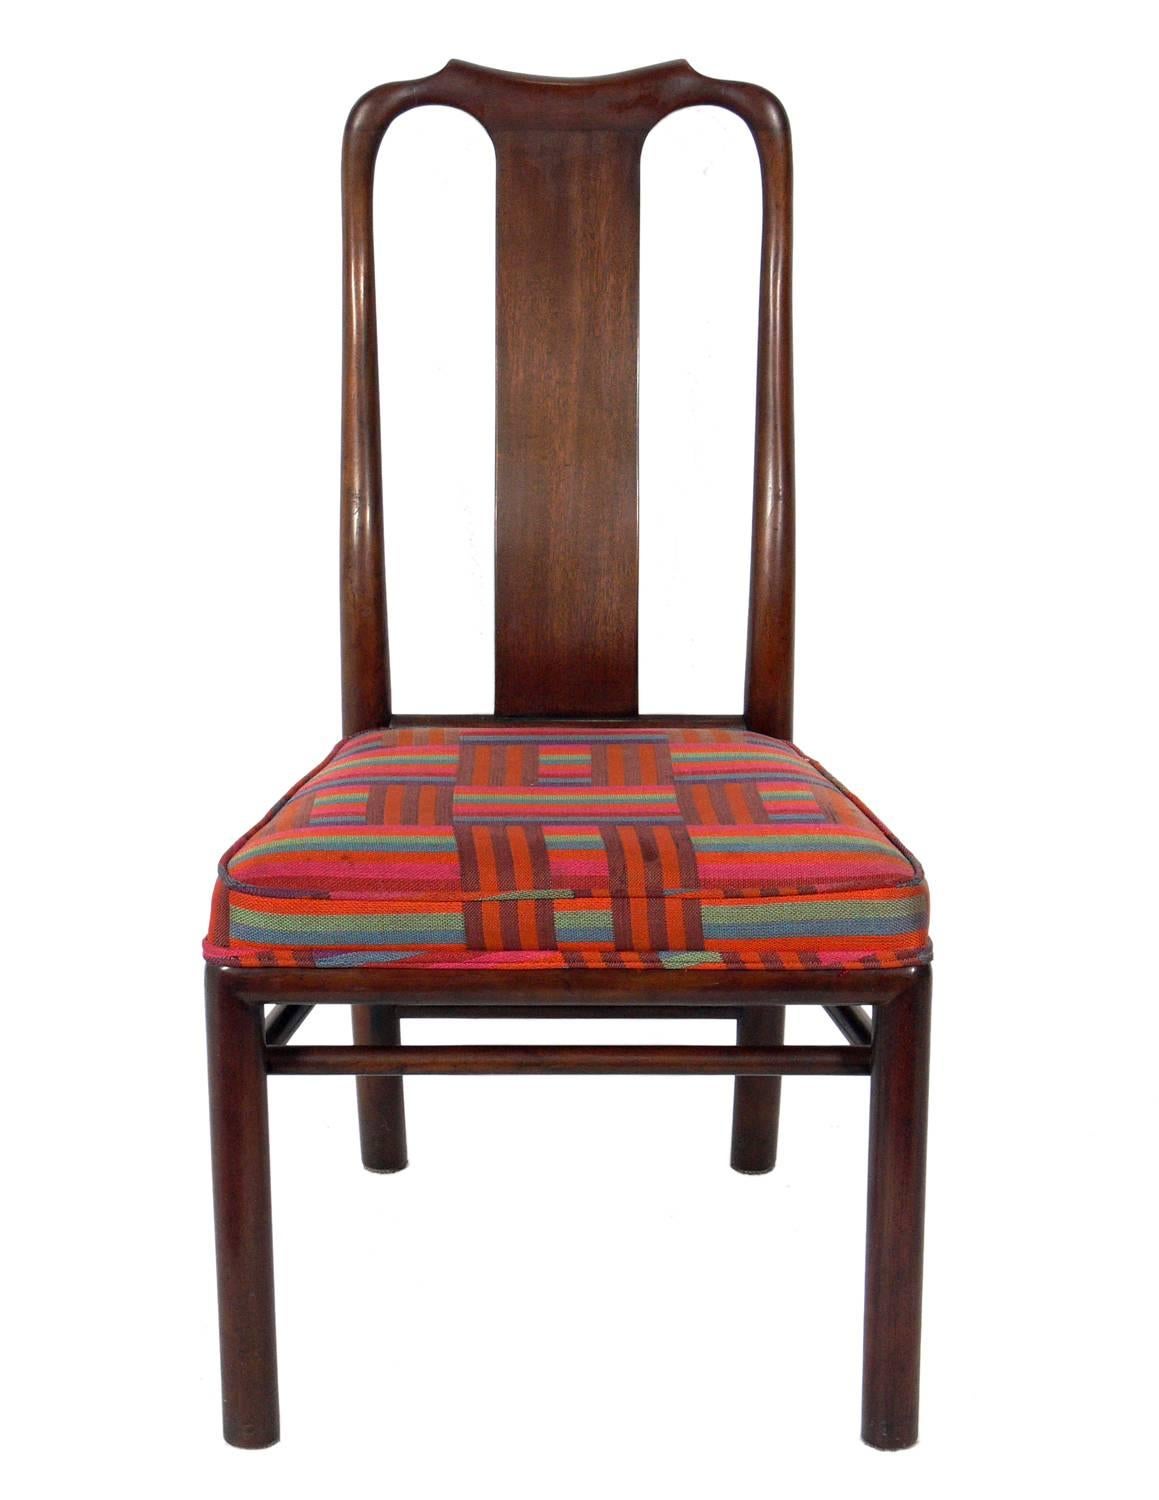 Set of eight dining chairs with subtle Asian influence, designed by Michael Taylor for Baker, American, circa 1960s. These chairs are currently being refinished and reupholstered and can be completed in your choice of finish color and your fabric.